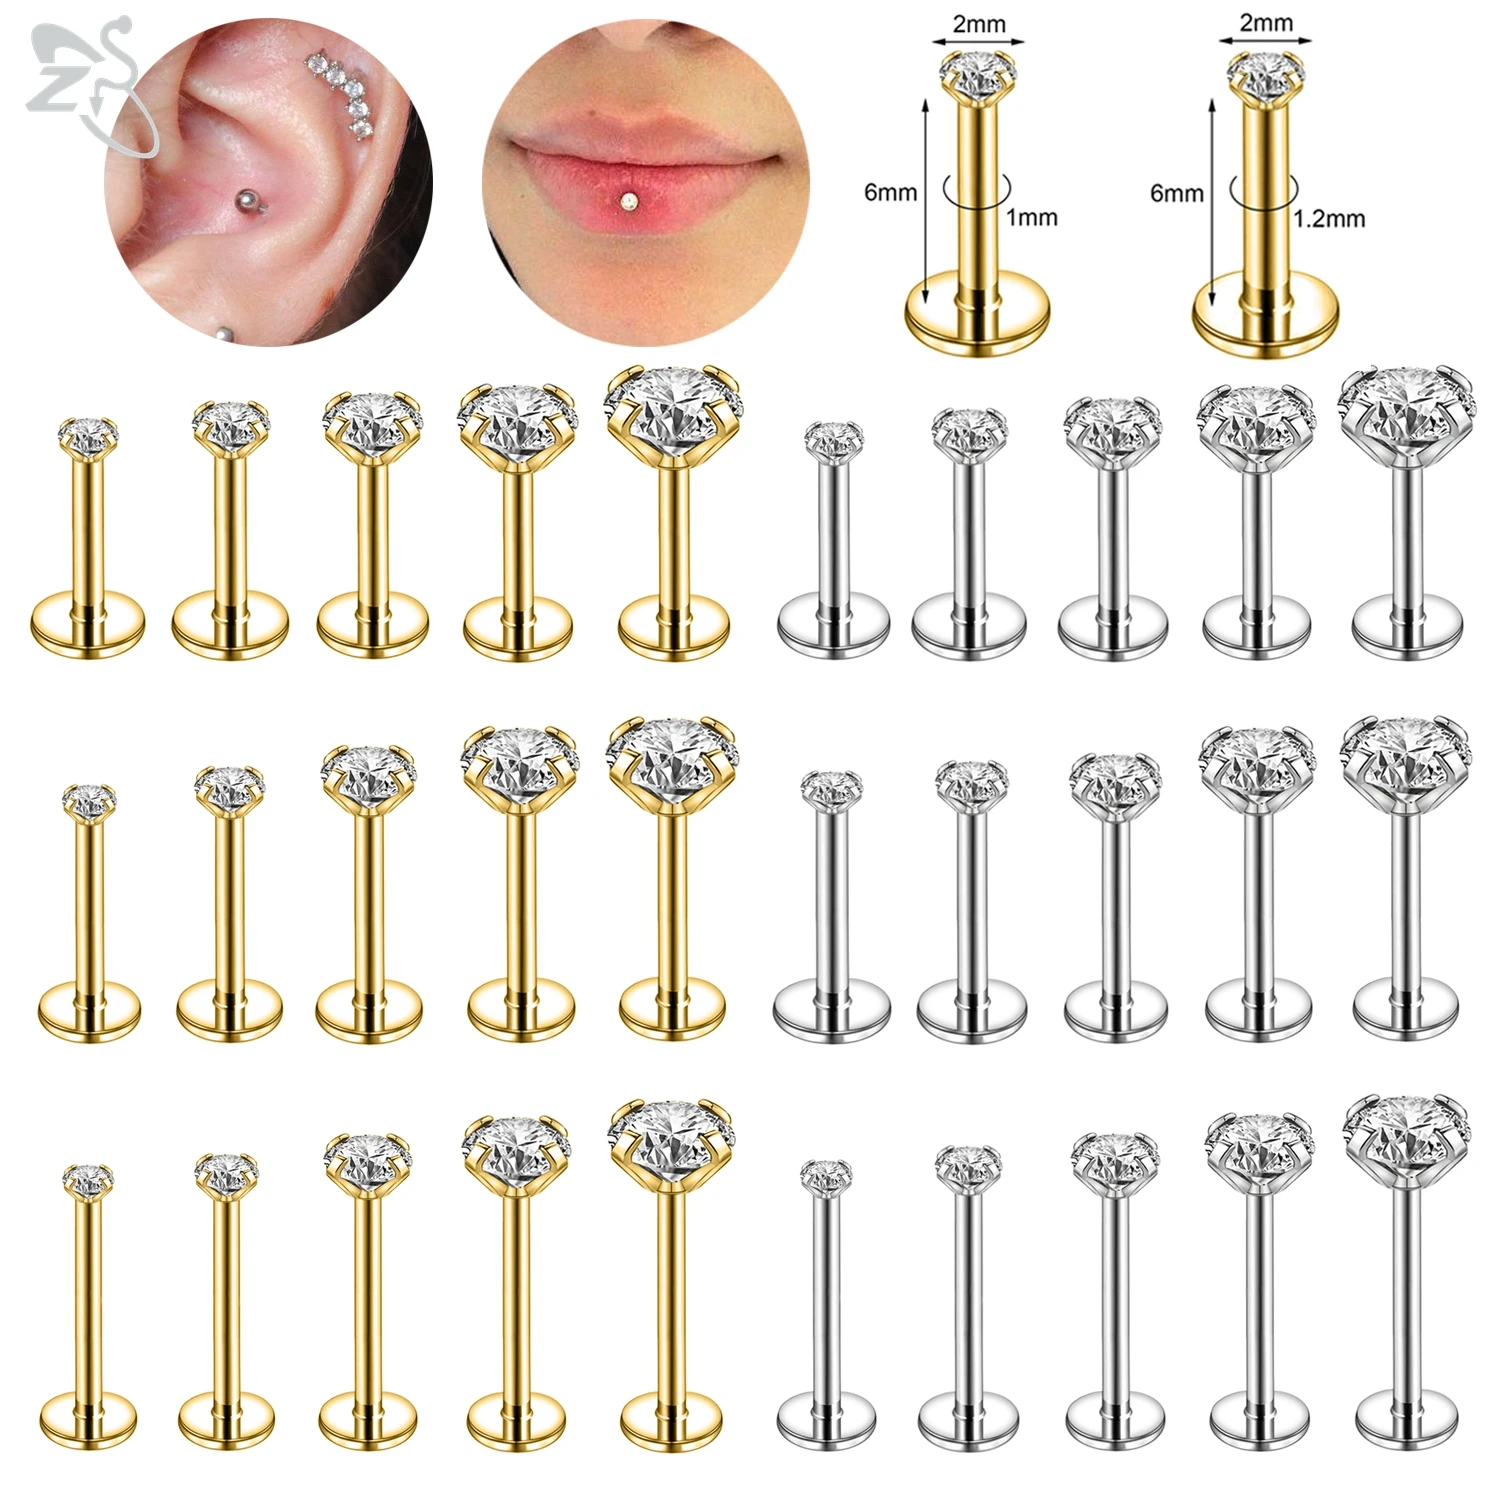 AOEDEJ 10Pcs/Lot Gold Color 16/18G Stainless Steel Labret Lip Stud Set 2/3/4/5/6MM CZ Crystal Helix Cartilage Tragus Piercings-animated-img